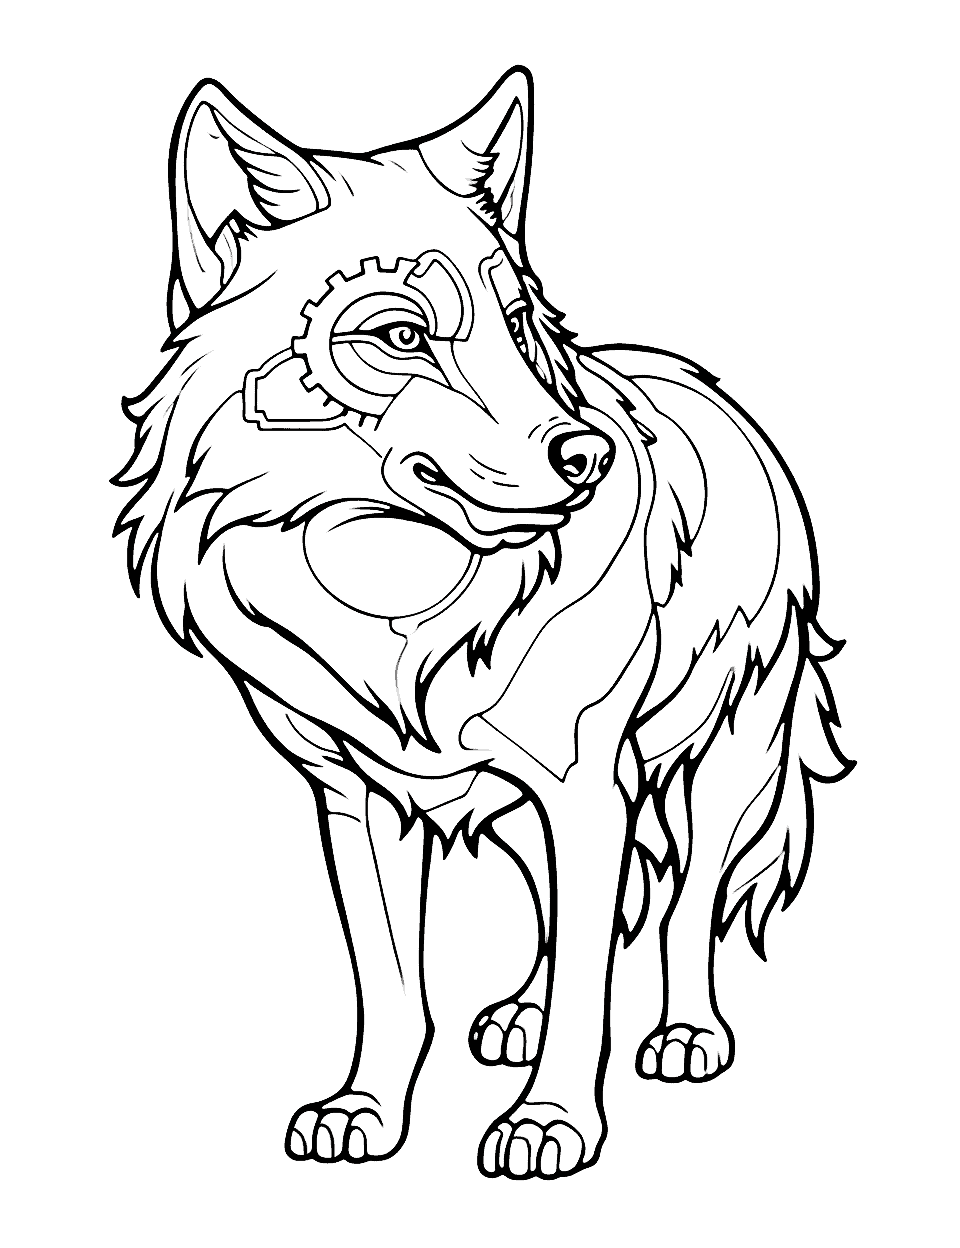 Steampunk Wolf Coloring Page - A mechanical wolf with gears, cogs.